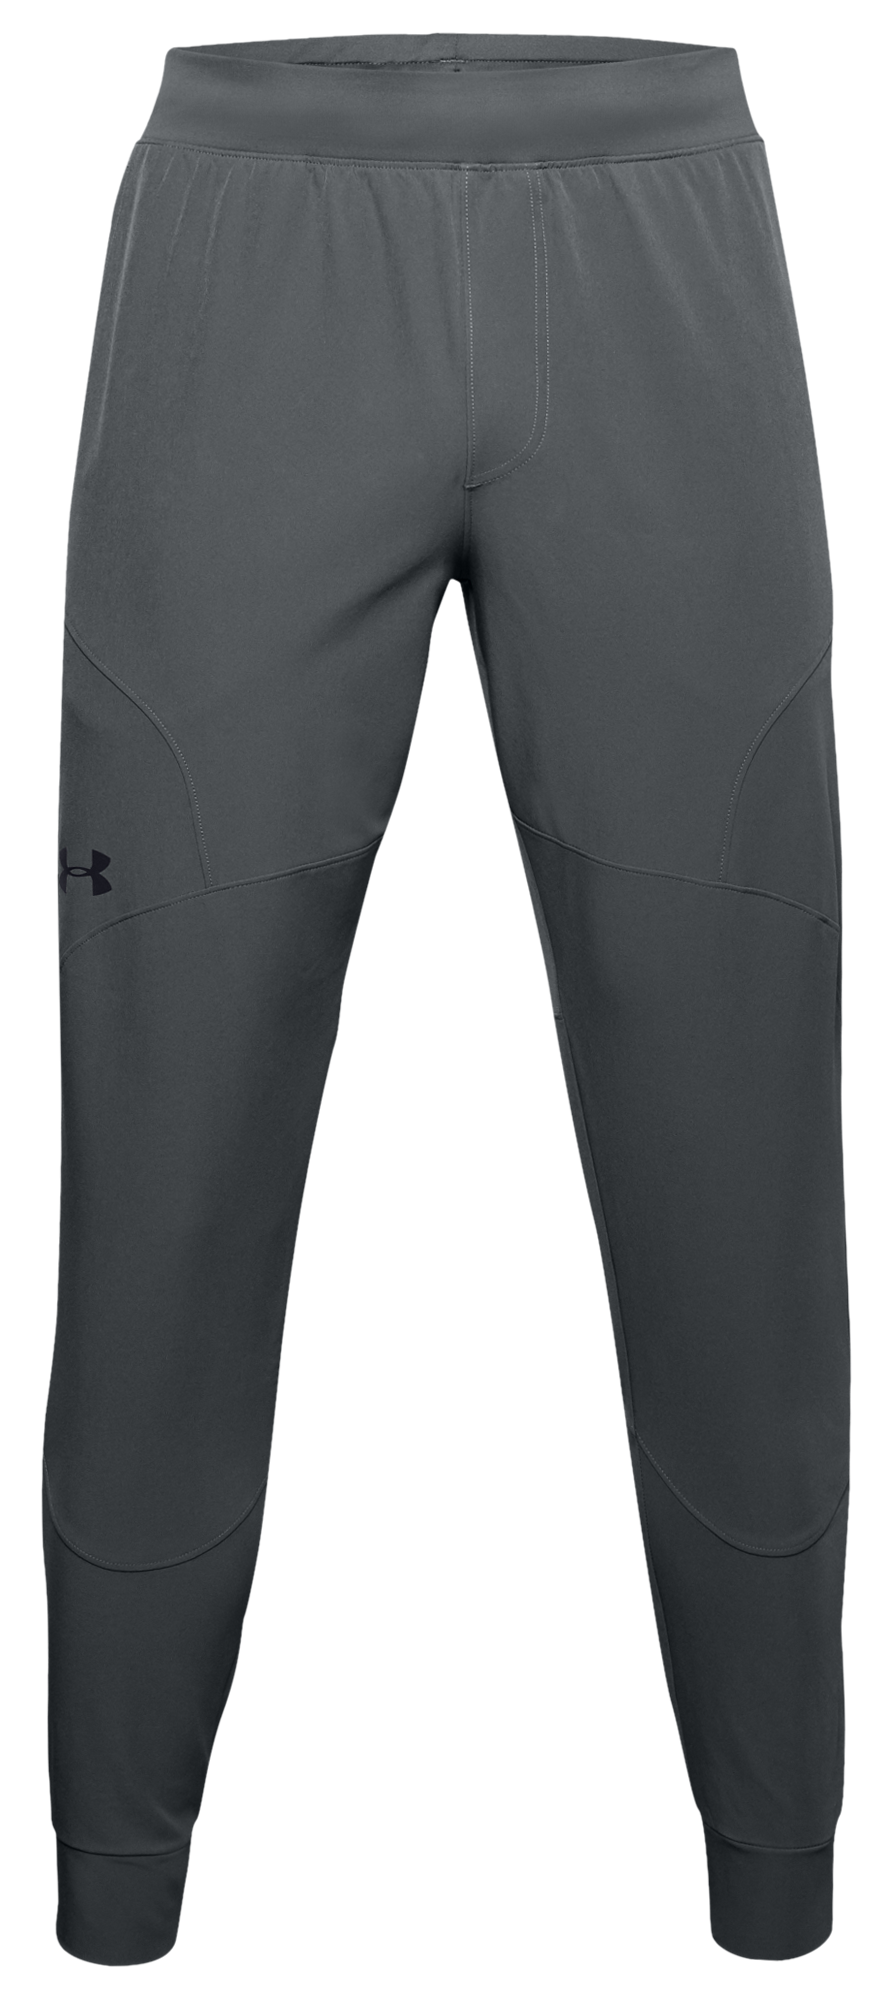 Under Armour Hybrid Woven Pant - Pitch Grey